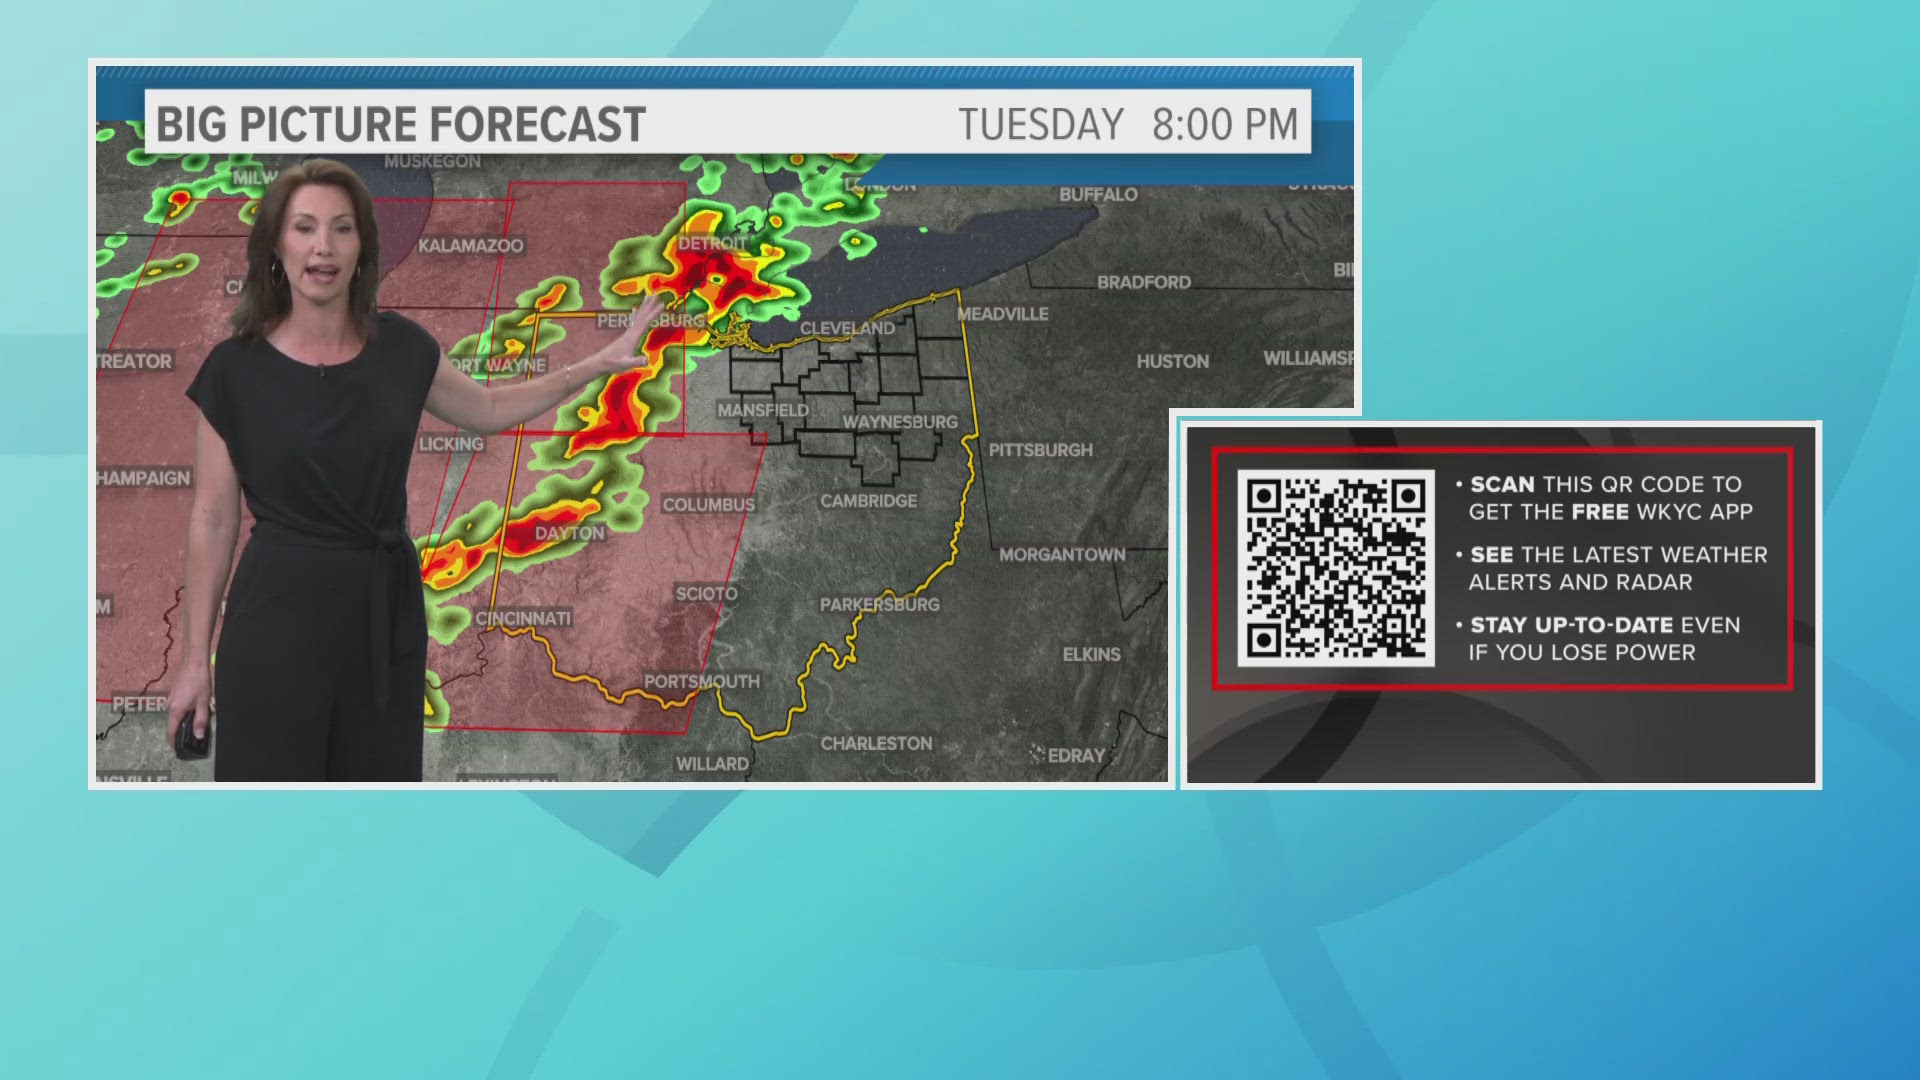 Tornado watches remain west of the area for now, but Betsy Kling is keeping an eye on the situation as it unfolds.